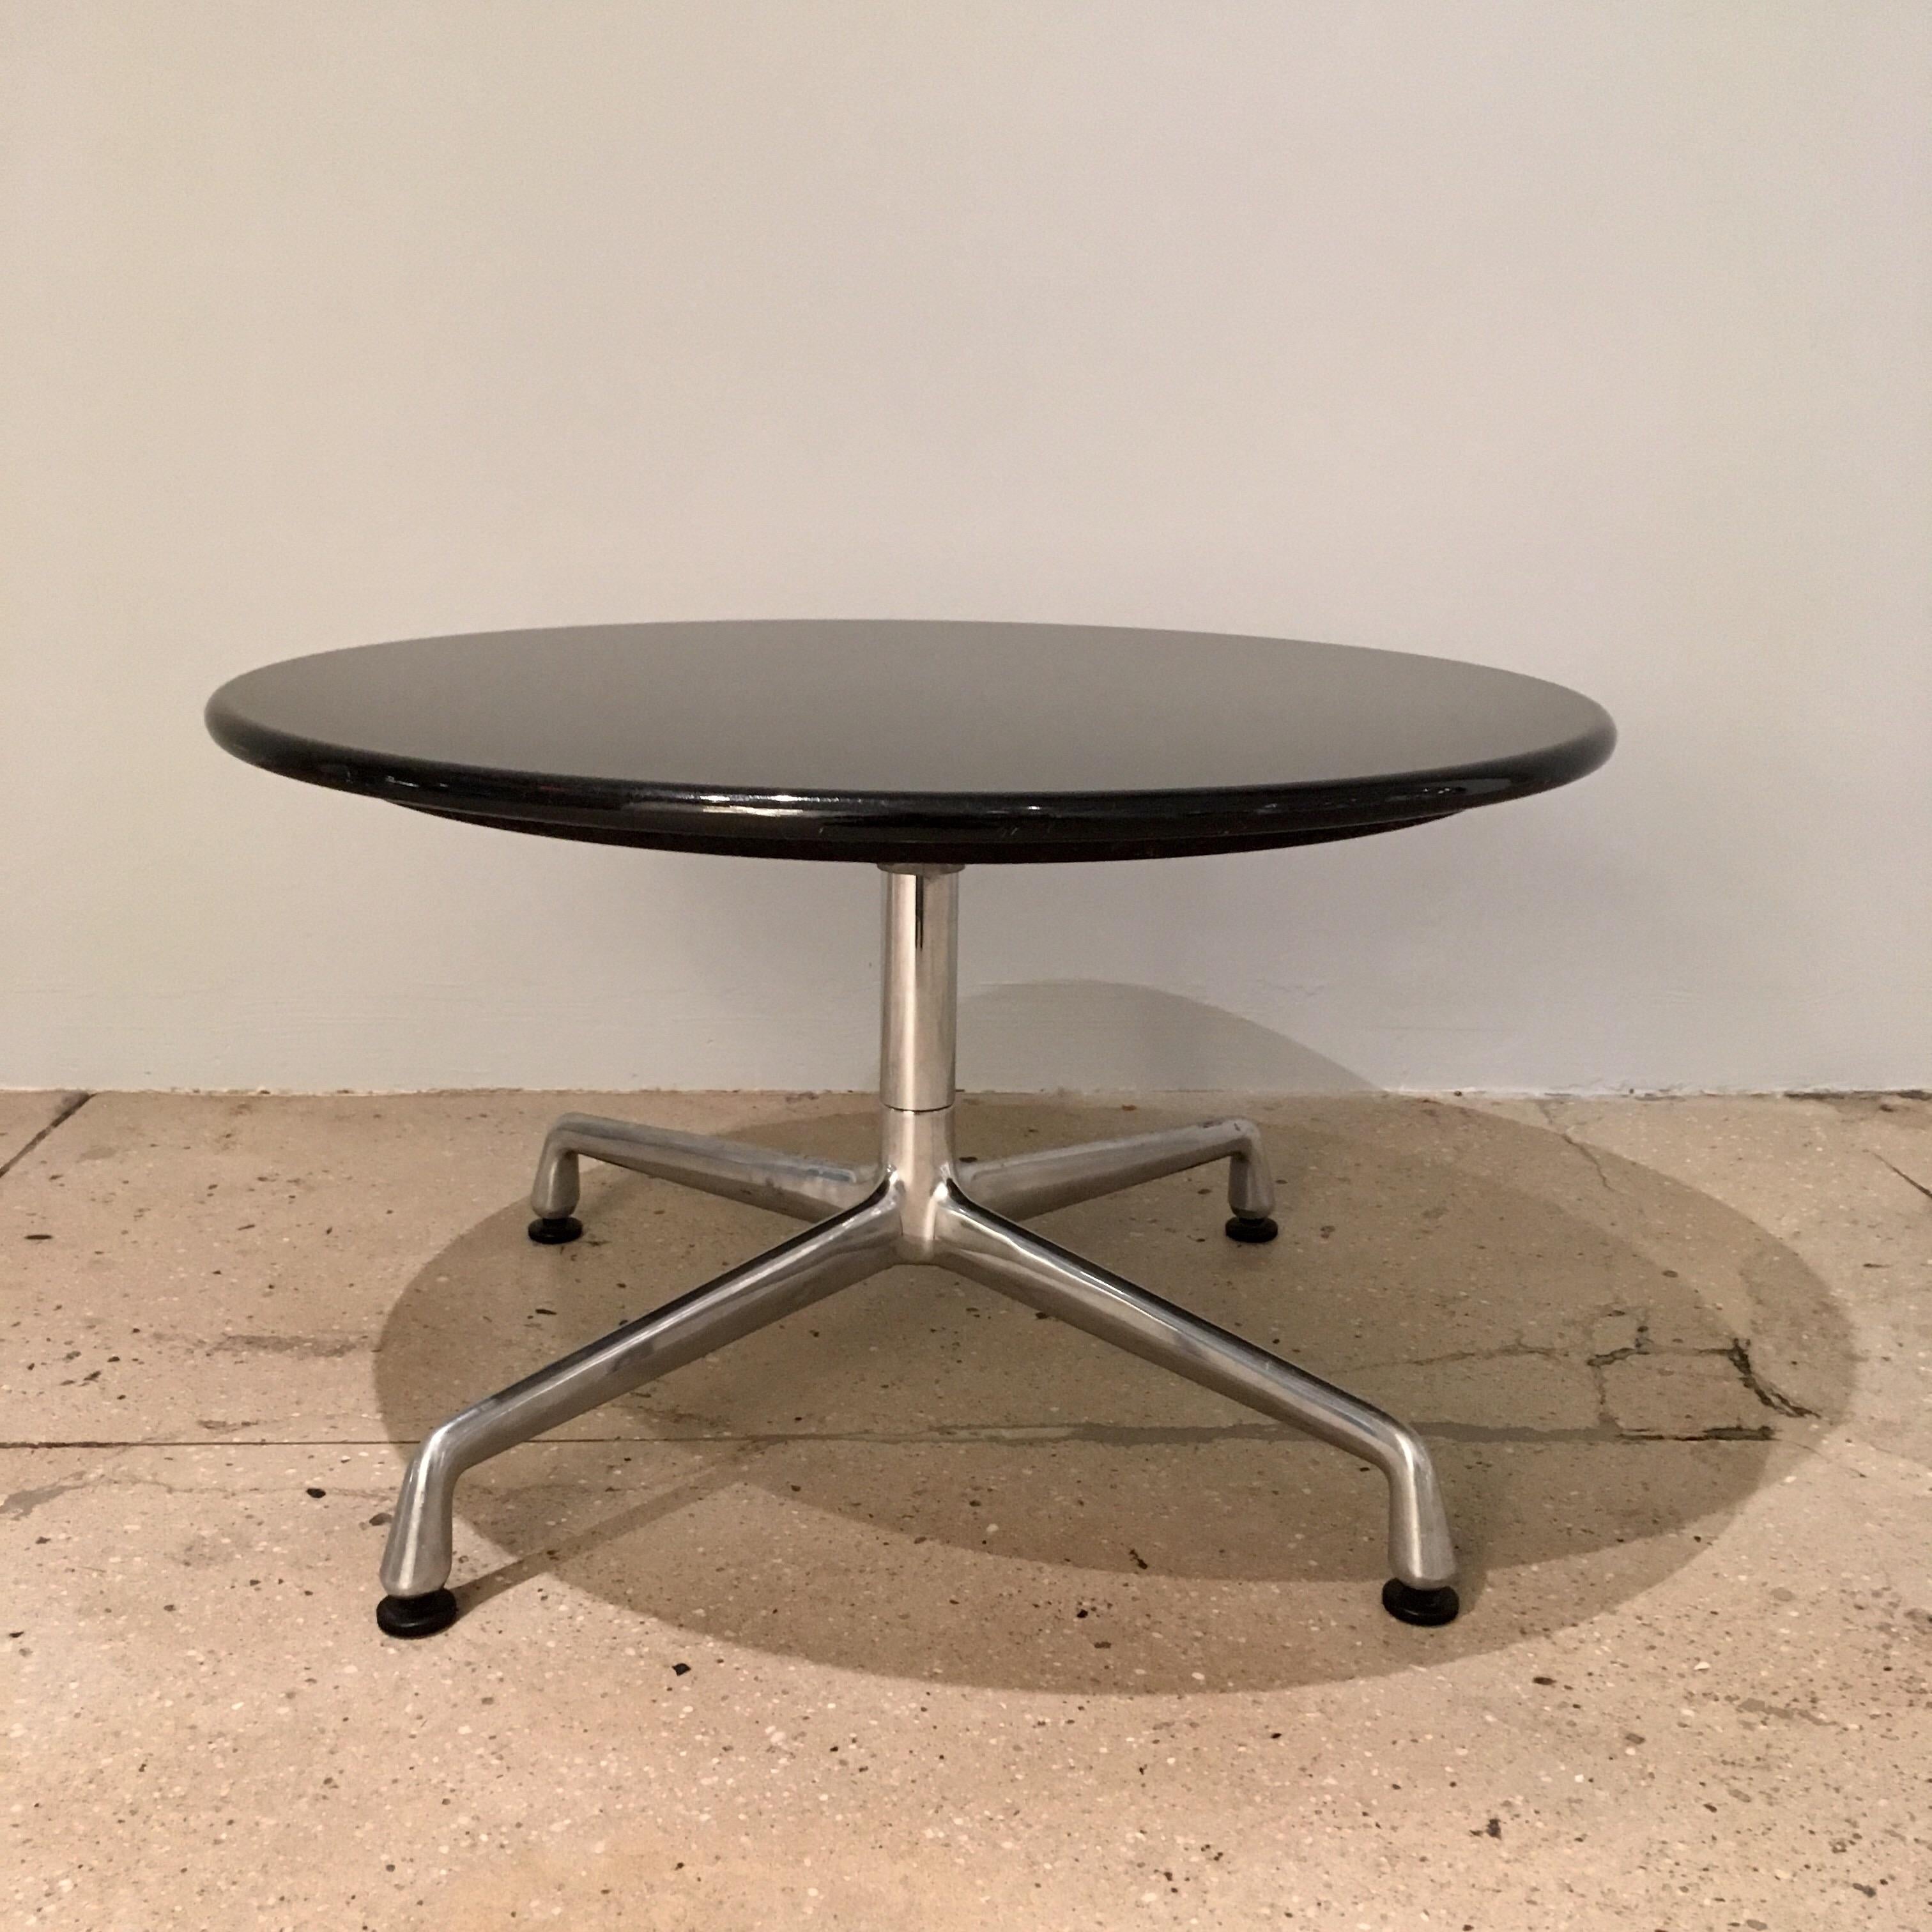 A pair of side tables composed of granite circular tops and sweeping aluminum legs design by Charles Eames for Herman Miller. Aluminum Group, 1960s.